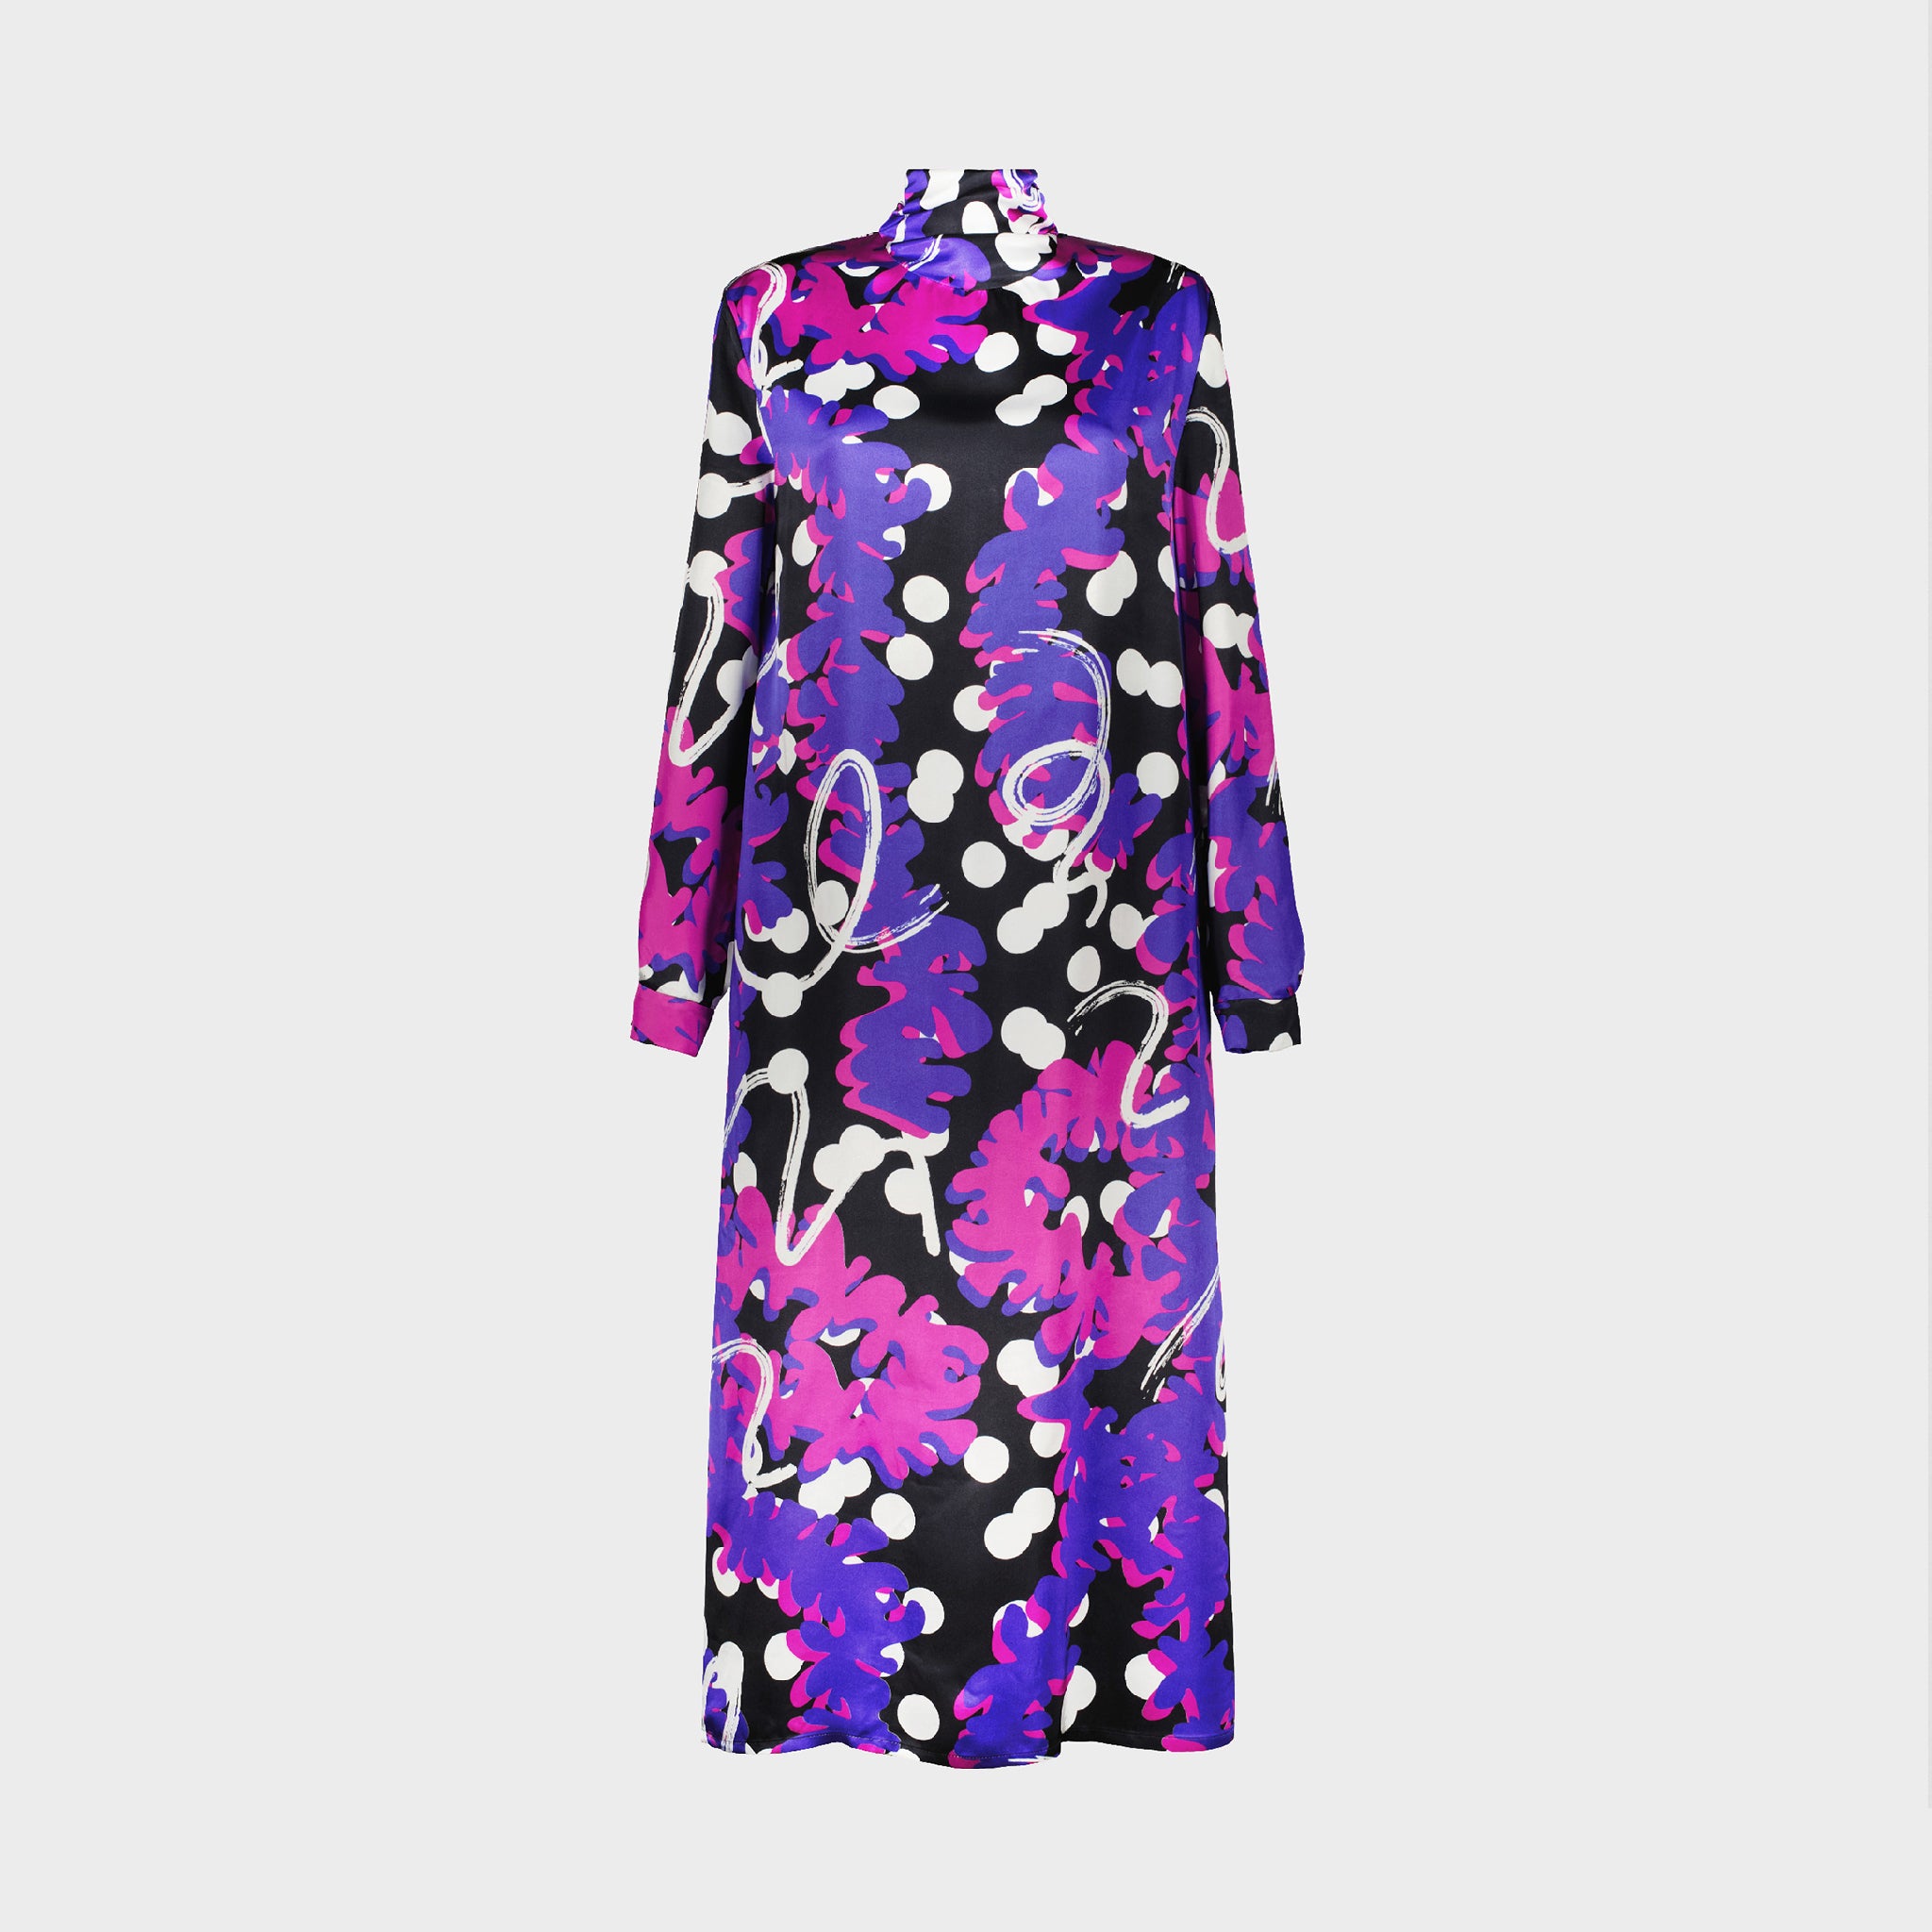 SHIFT DRESS WITH ABSTRACT PRINT